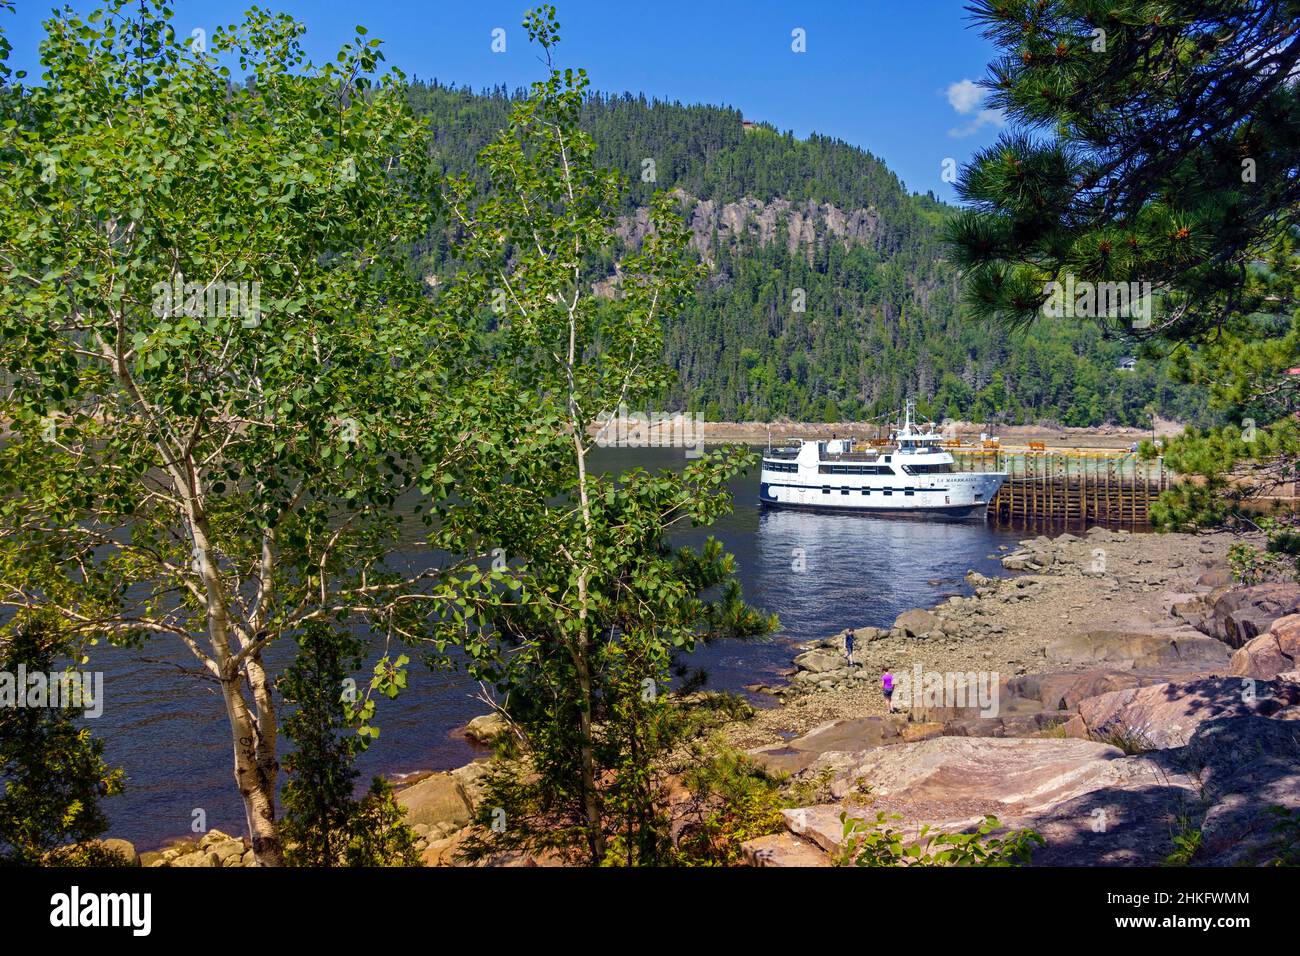 Canada, province of Quebec, Saguenay-Lac-Saint-Jean, the Saguenay fjord, Sainte-Rose-du-Nord, starting point for cruises and hikes on the water Stock Photo